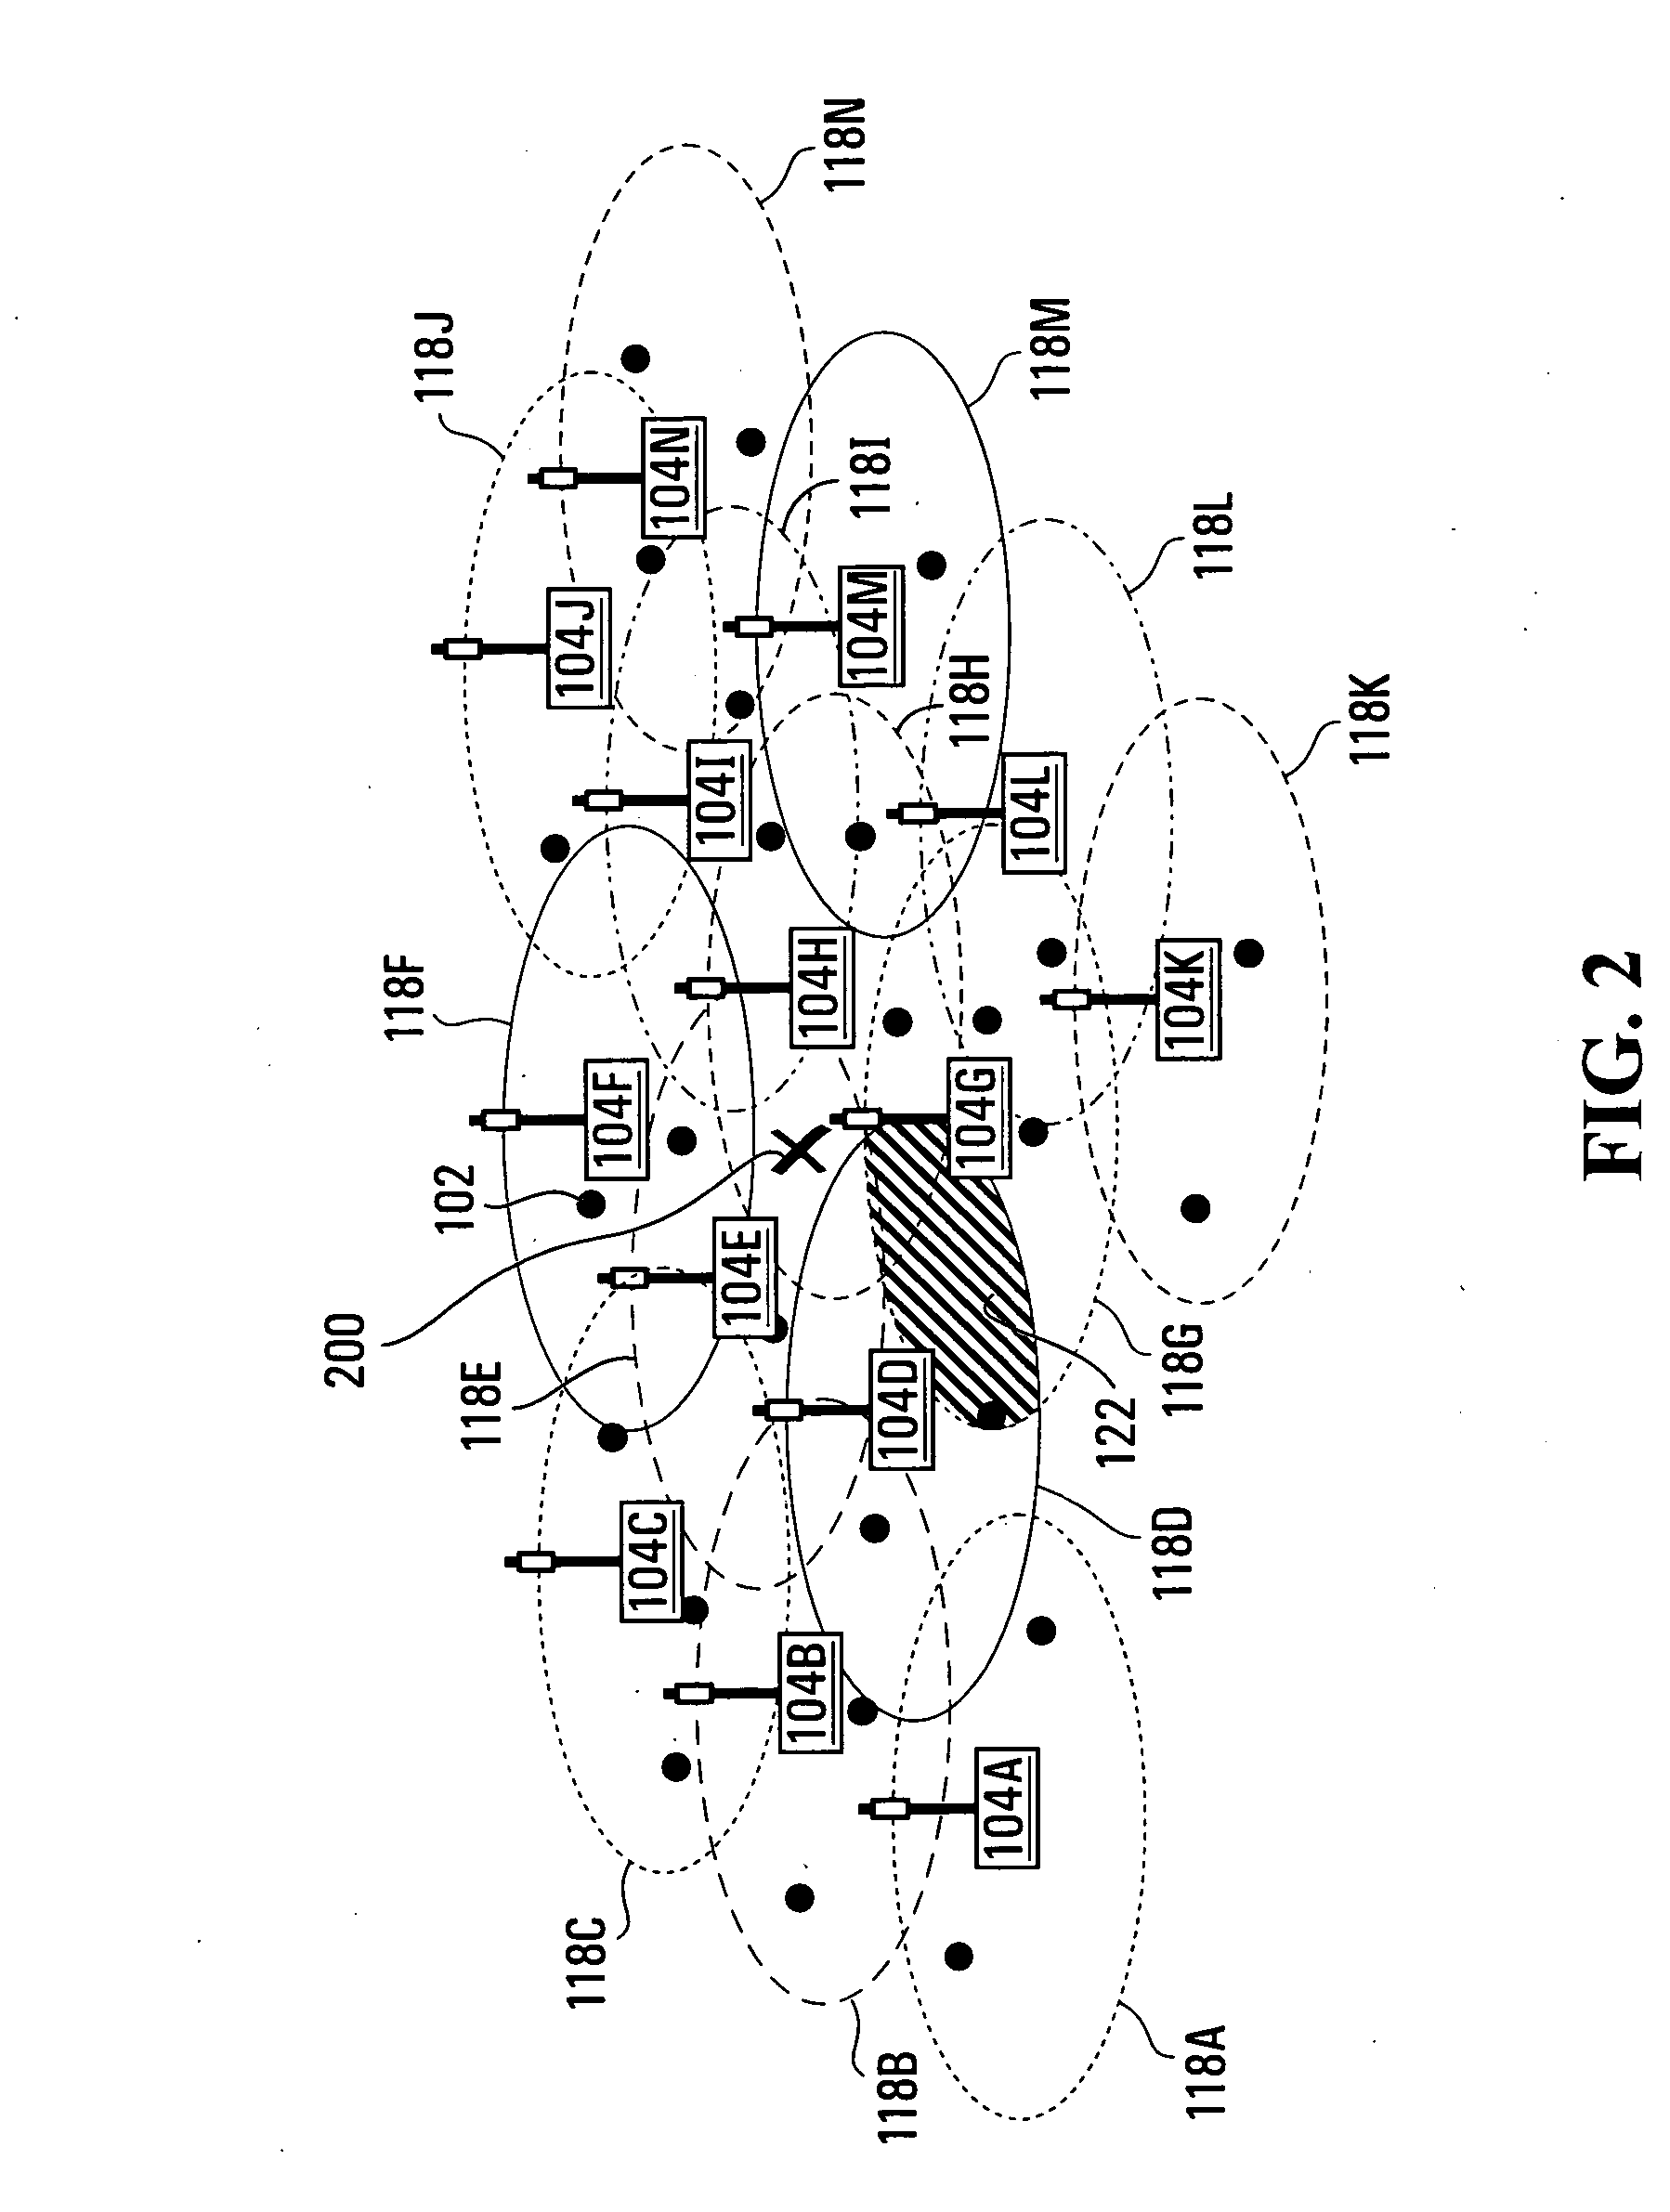 Methods and systems for increasing wireless traffic capacity in the vicinity of an event site